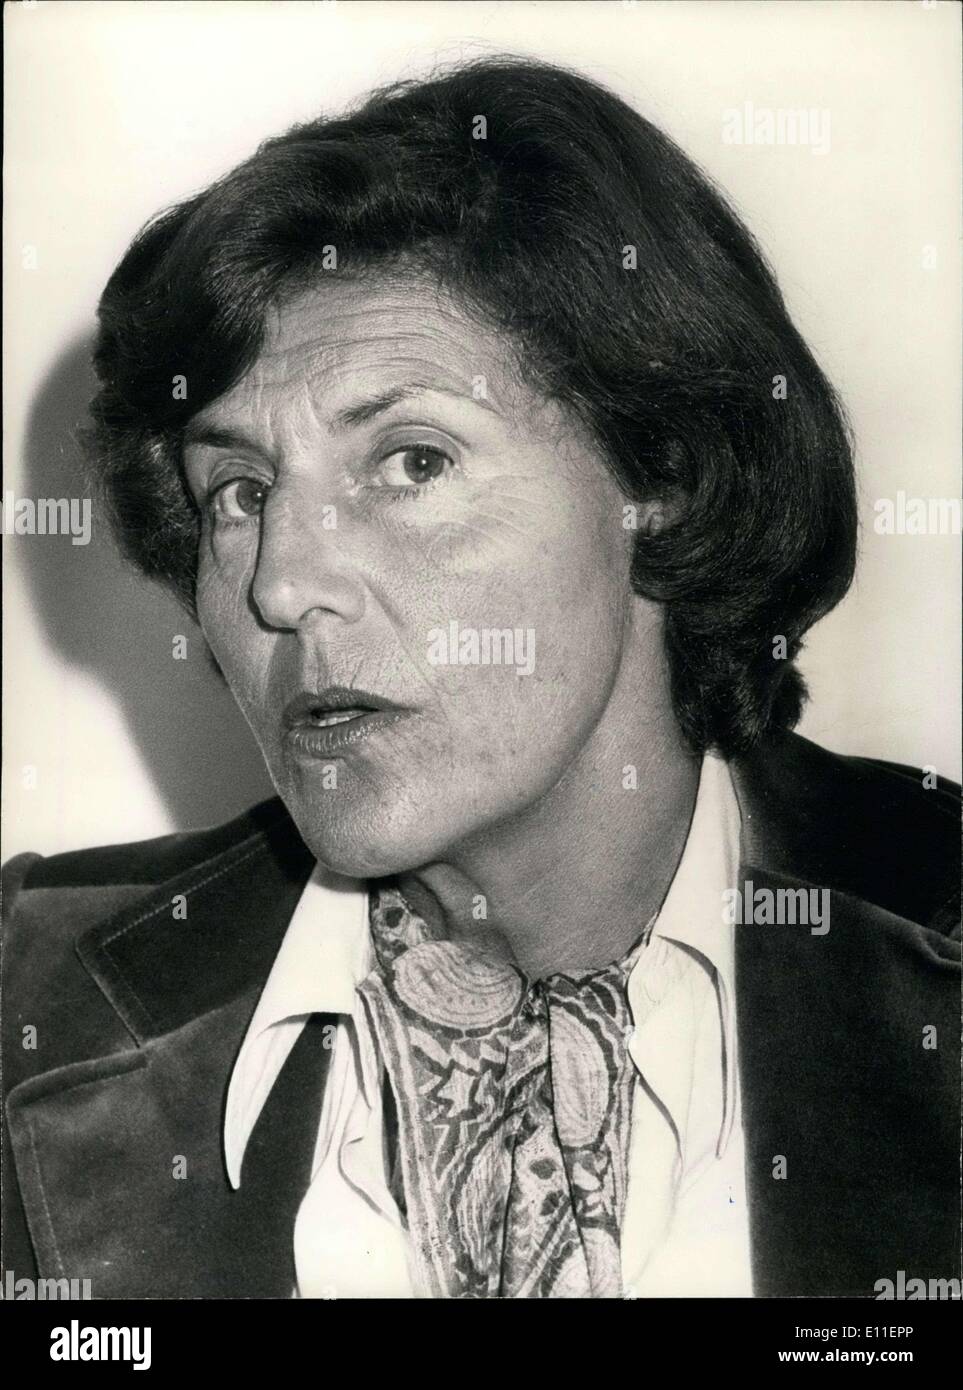 Jun. 09, 1977 - Mrs. Monique Pelletier, who will take on drug problems in France according to President Giscard d'Estaing, held Stock Photo